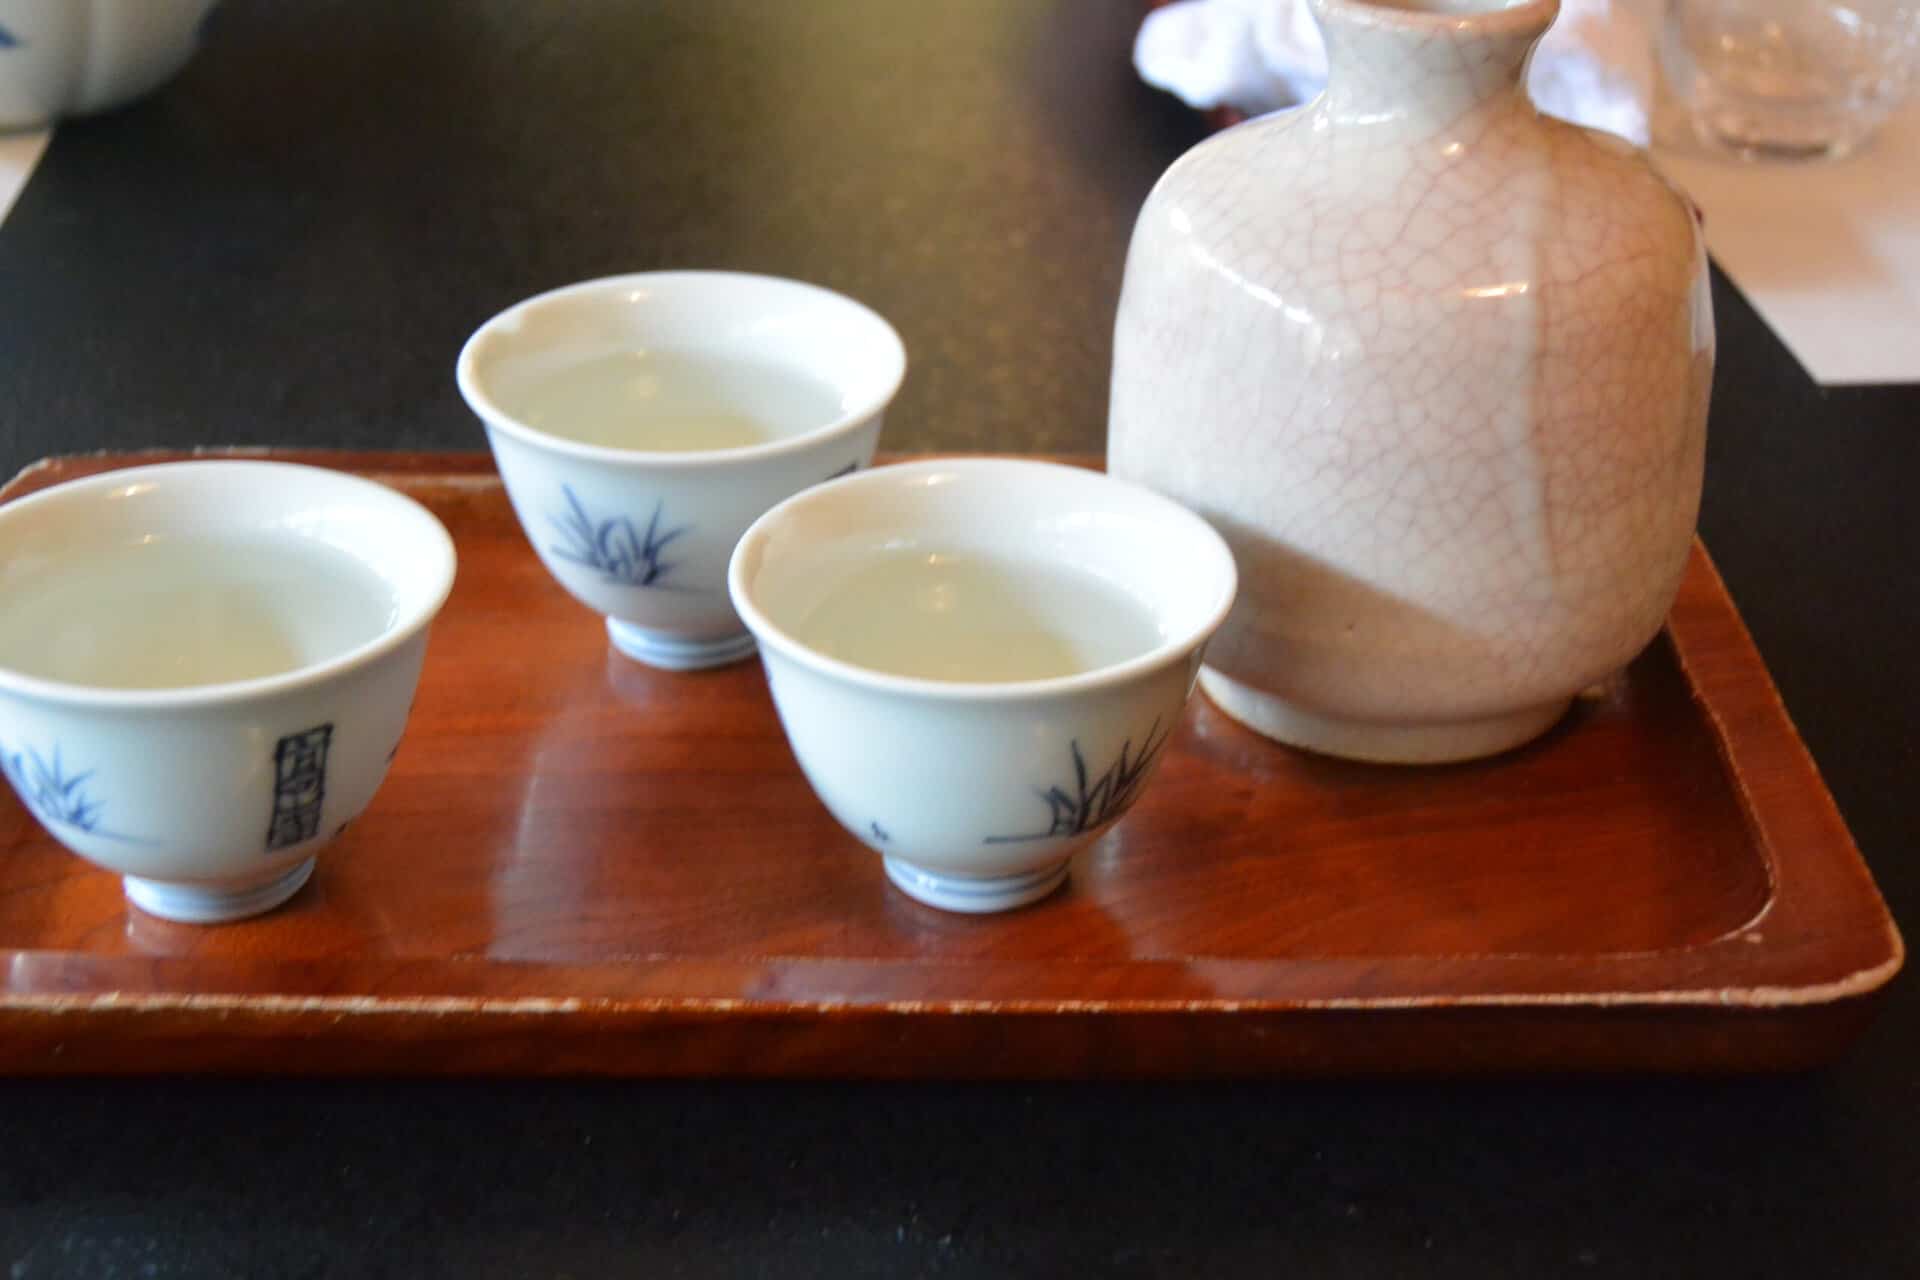 sake at the restaurant in the sake brewery in Ome, Tokyo